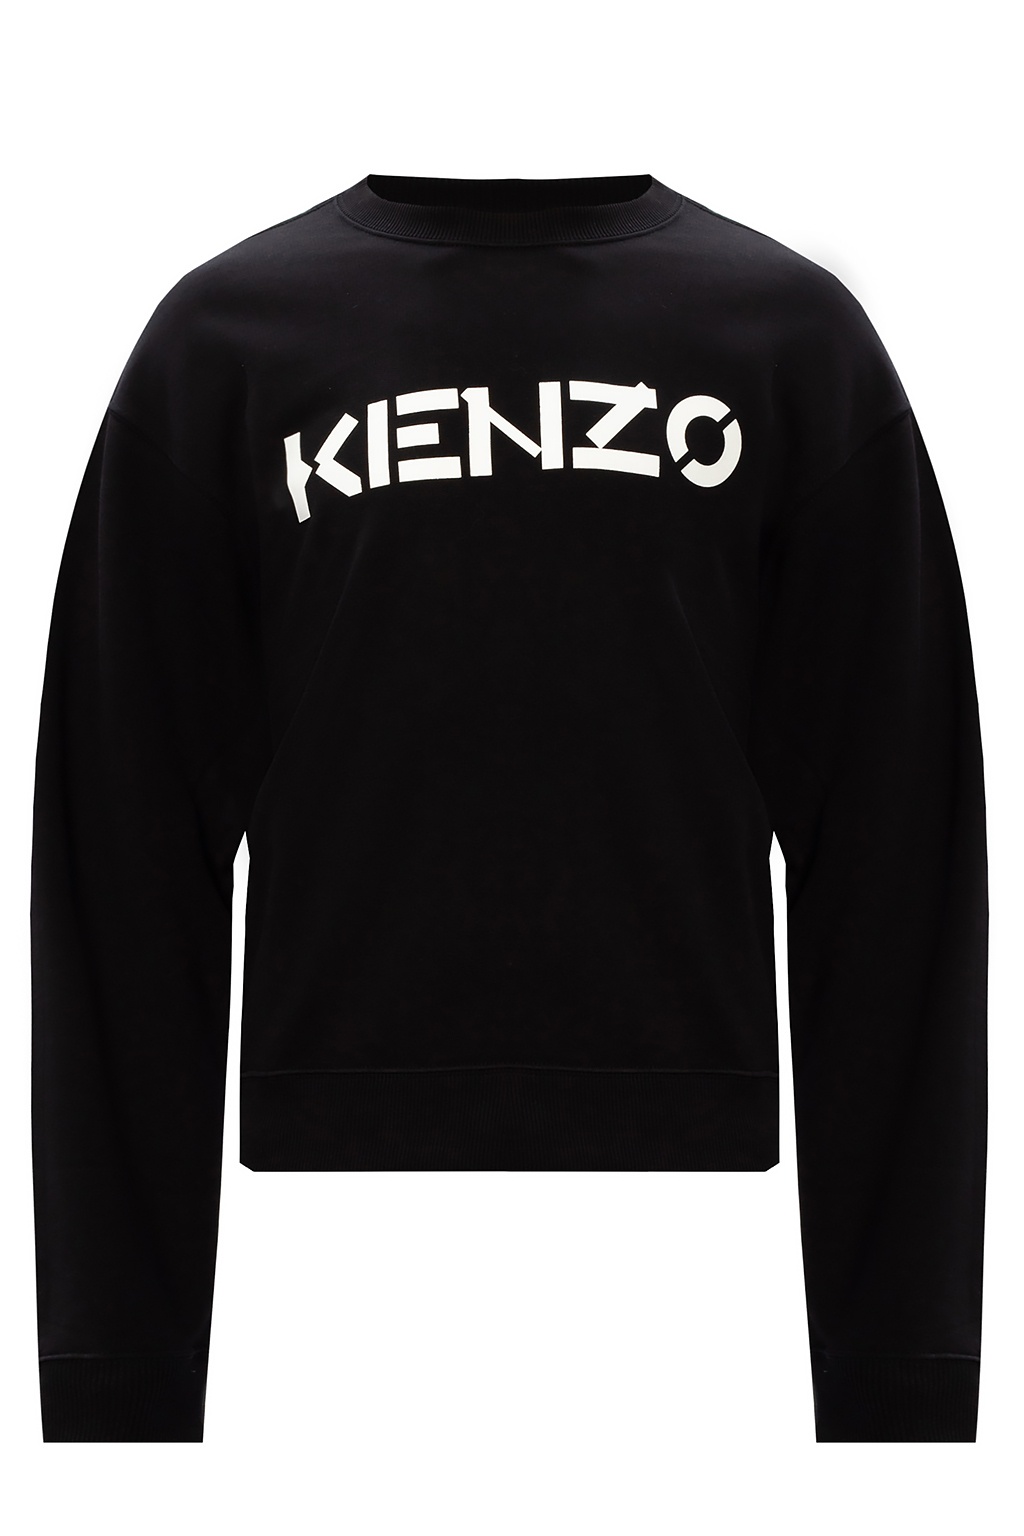 kenzo about us